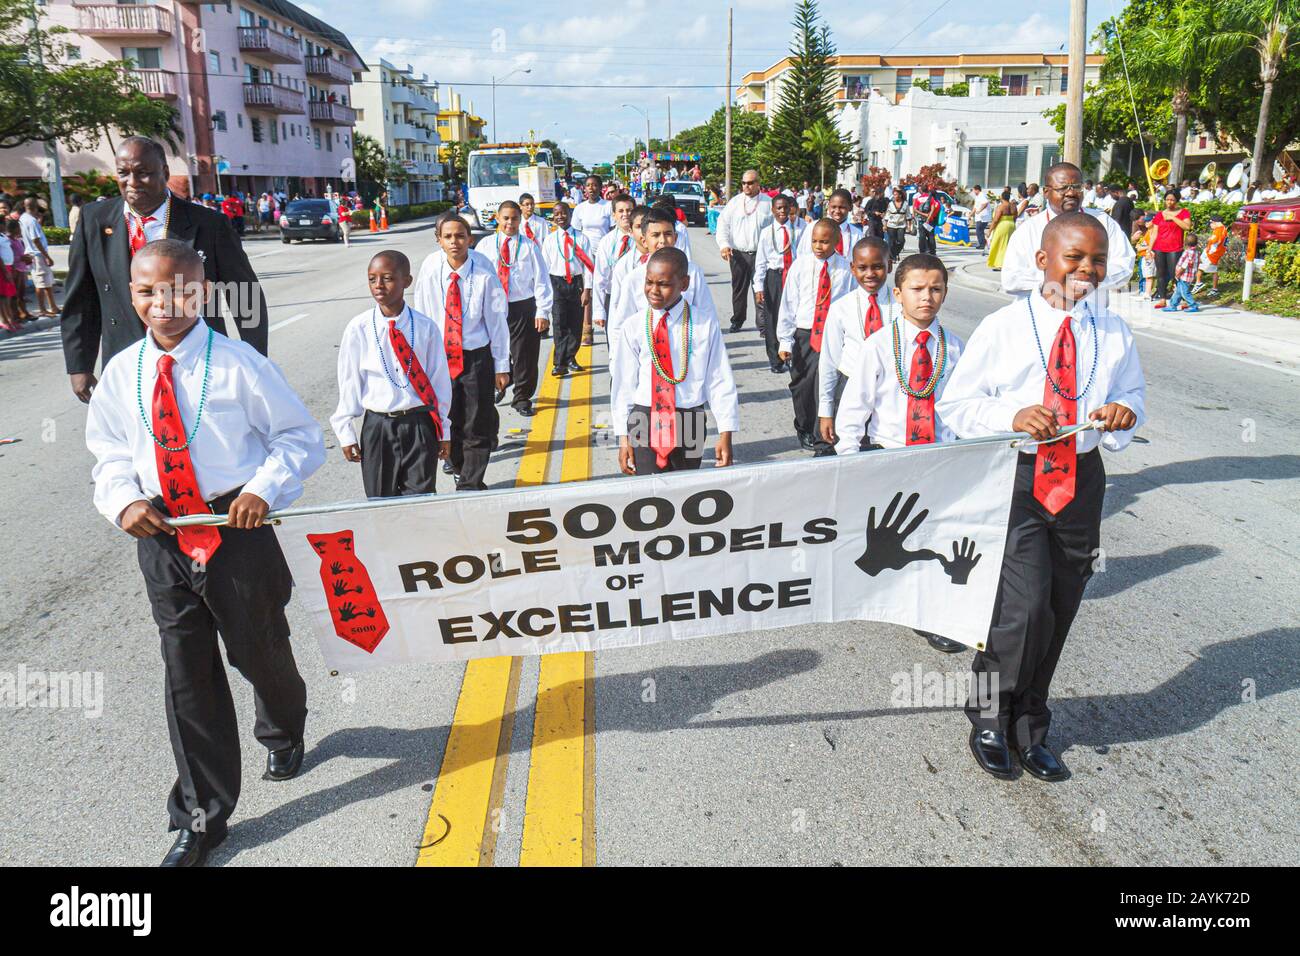 Miami Florida,North Miami,Winternational Thanksgiving Day Parade,NE 125th Street,local celebration,Black student students Role Models of Excellence,bo Stock Photo